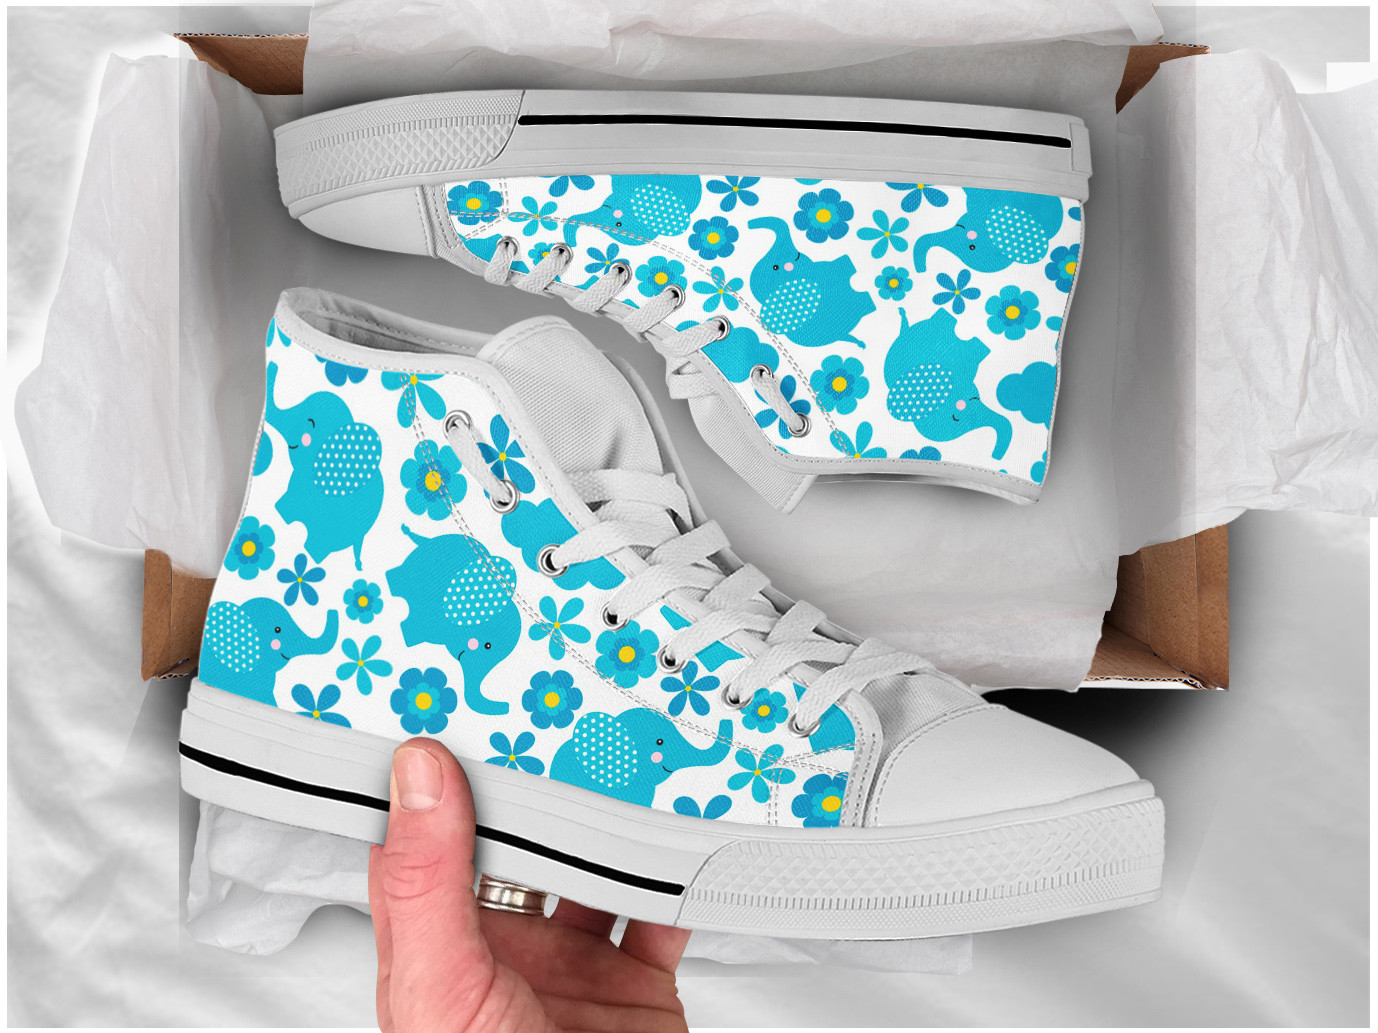 Floral Elephant Shoes | Custom High Top Sneakers For Kids & Adults